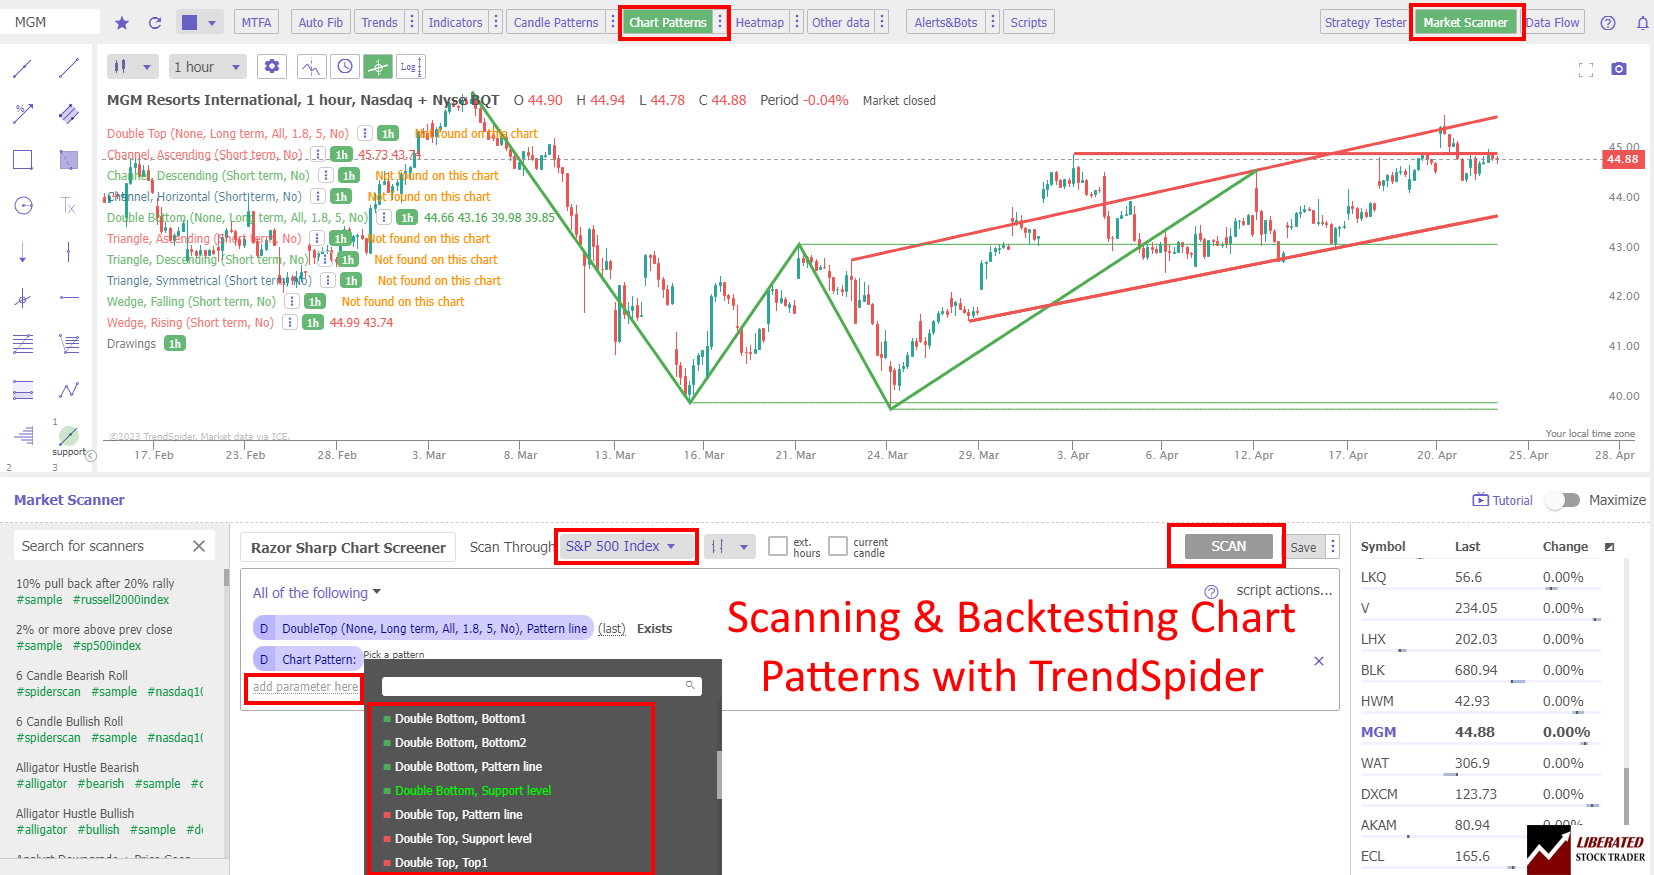 Scanning & Backtesting with TrendSpider AI Pattern Recognition